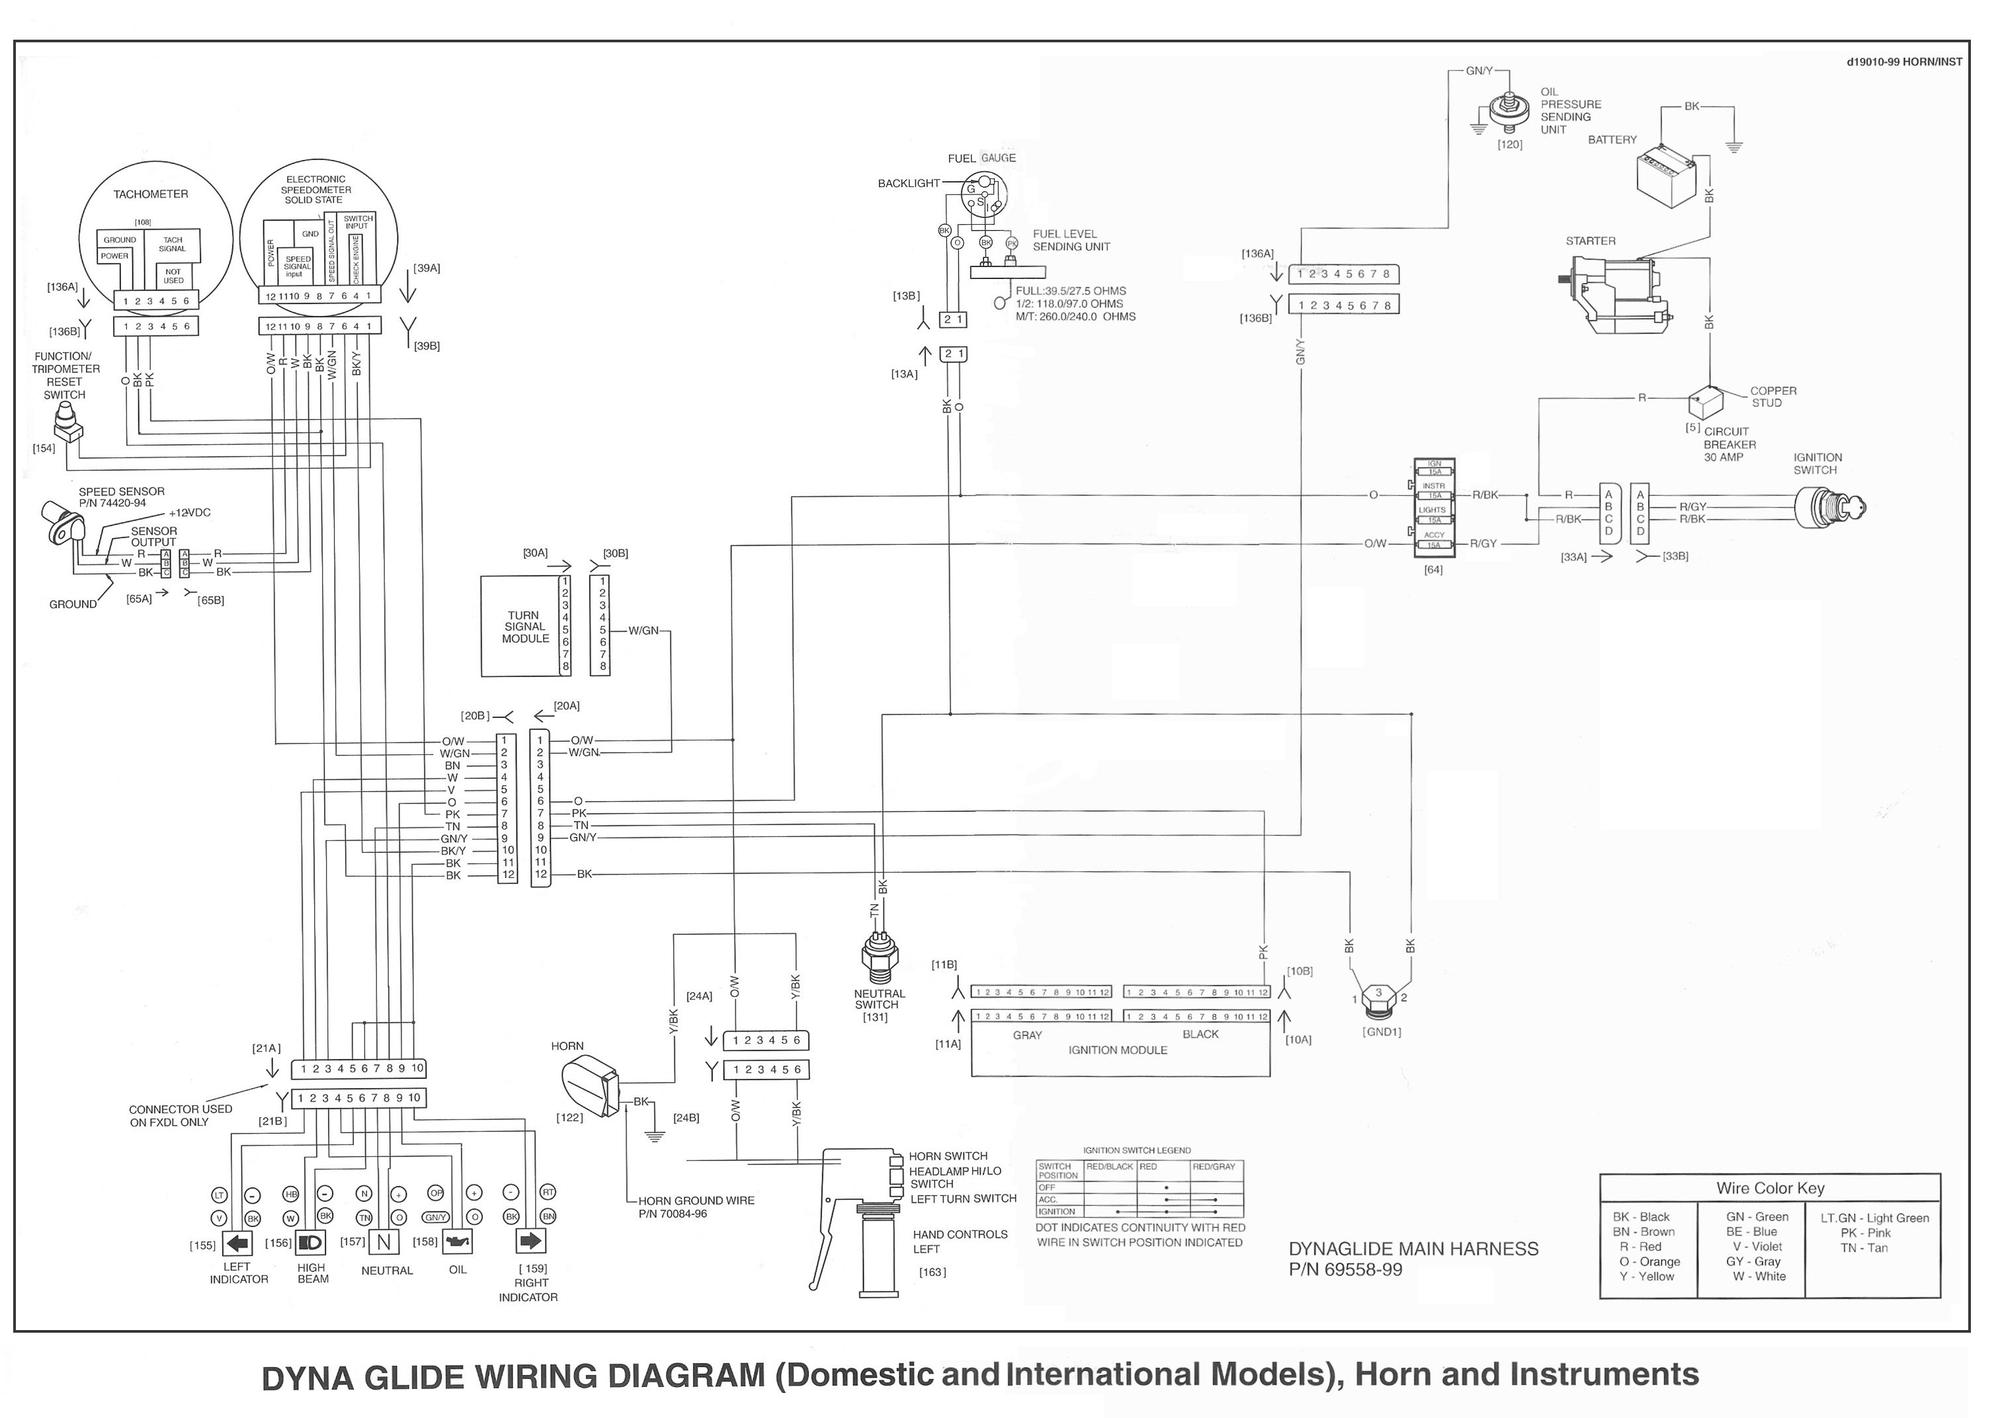 Wiring Diagram For A Gas Gas Pampera Motorcycle 2002 from schematron.org